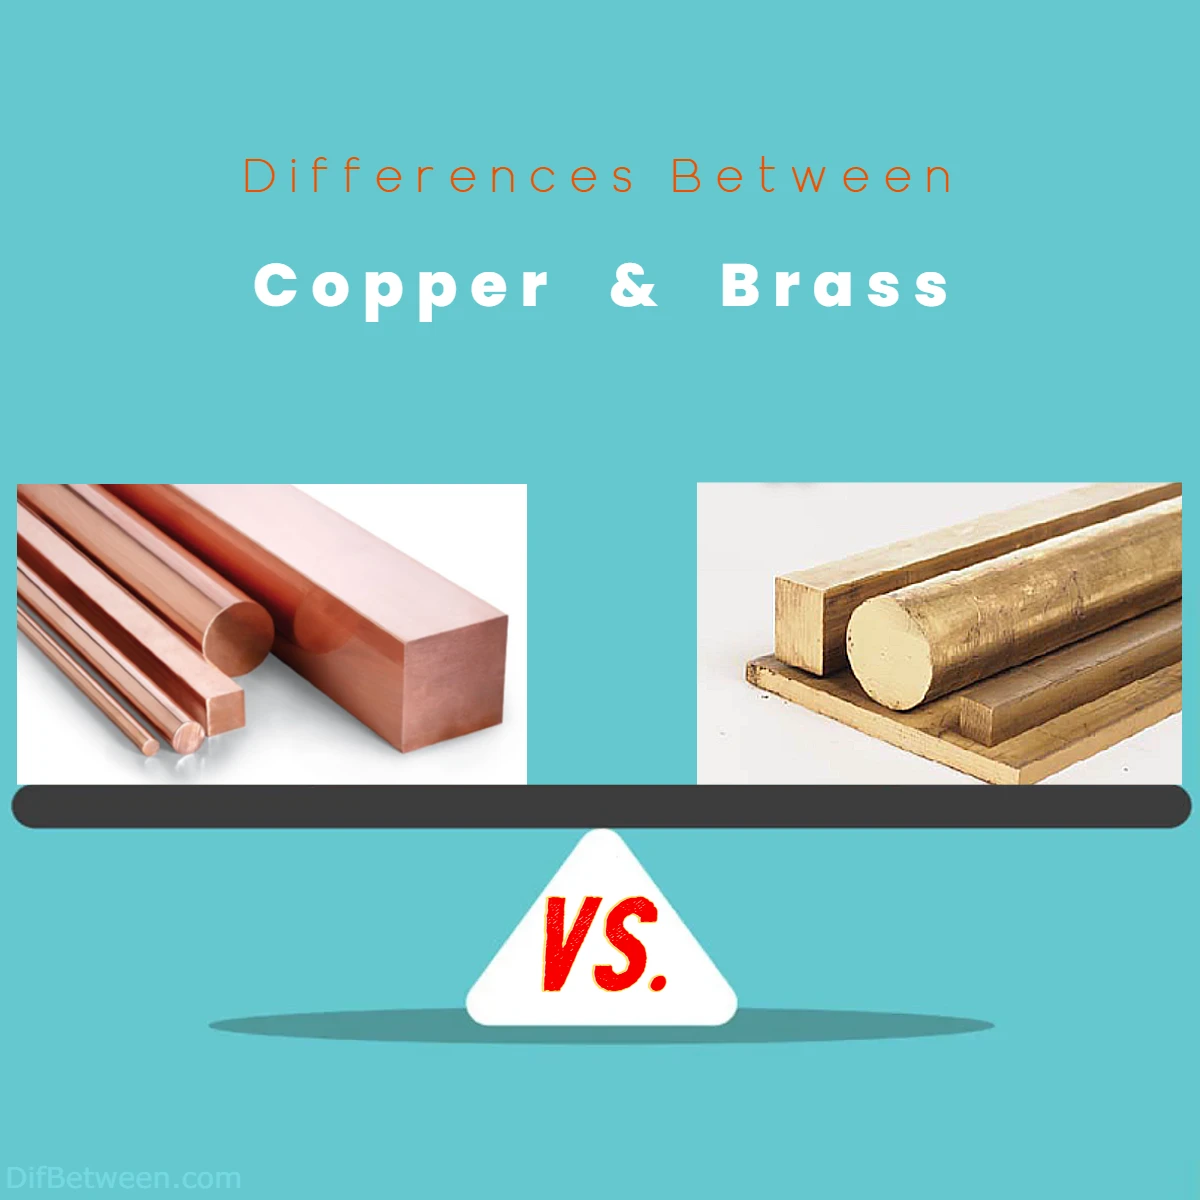 Differences Between Copper vs Brass